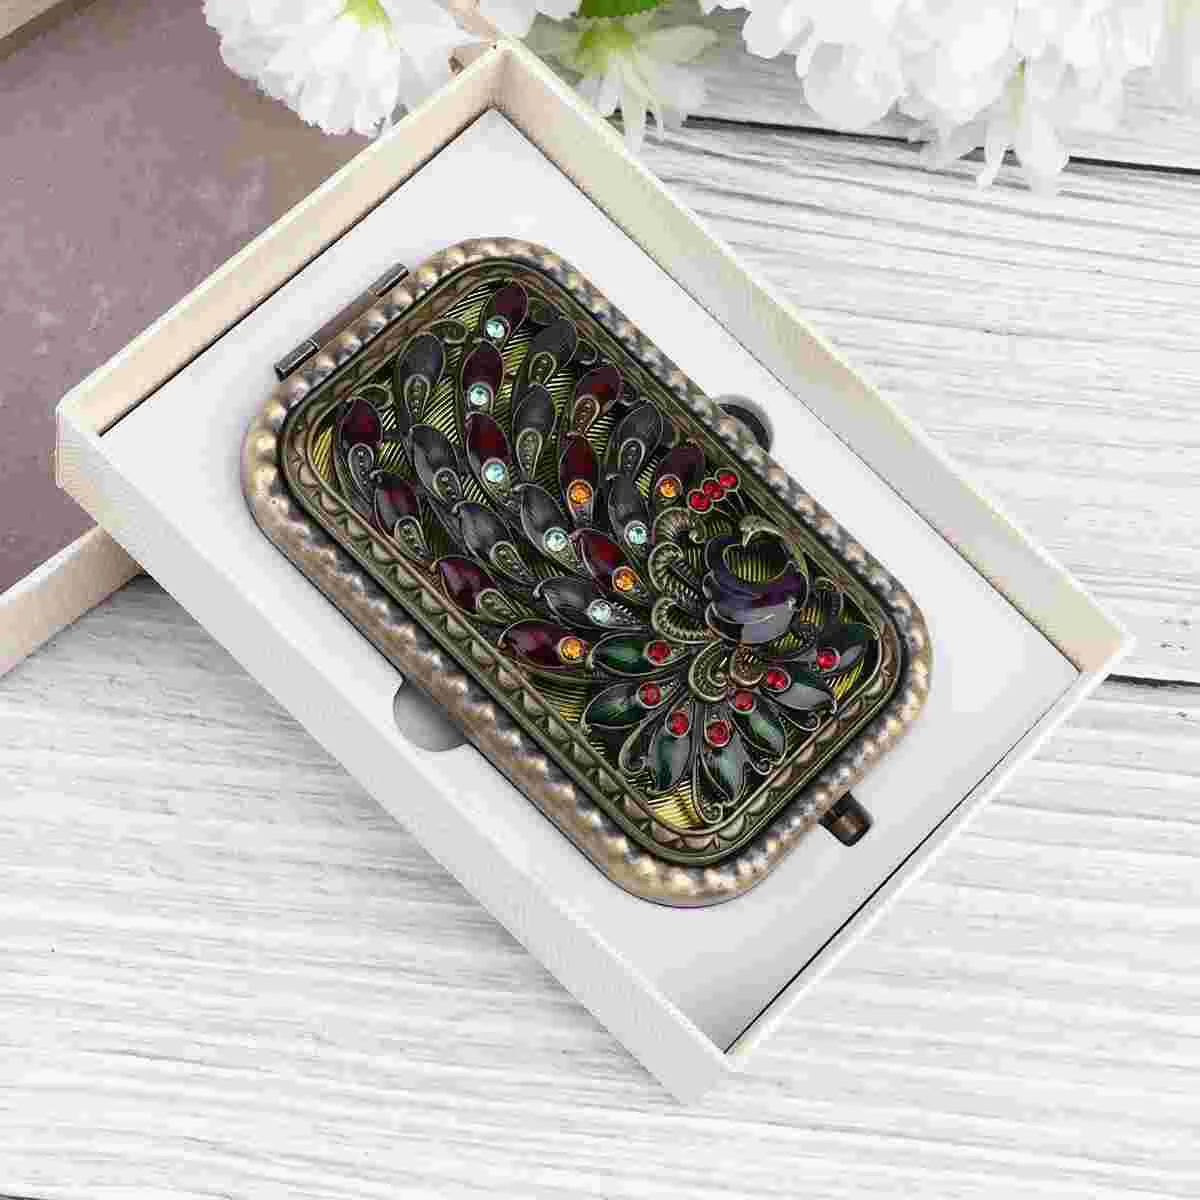 Mirror Compact Makeup Vintage Pocket Purse Foldable Double Mini Women Vanity Portable Side Travel Handheld Purses Mirrors 12 pcs telephone number mini book office purse contact pocket notebook paper tiny books